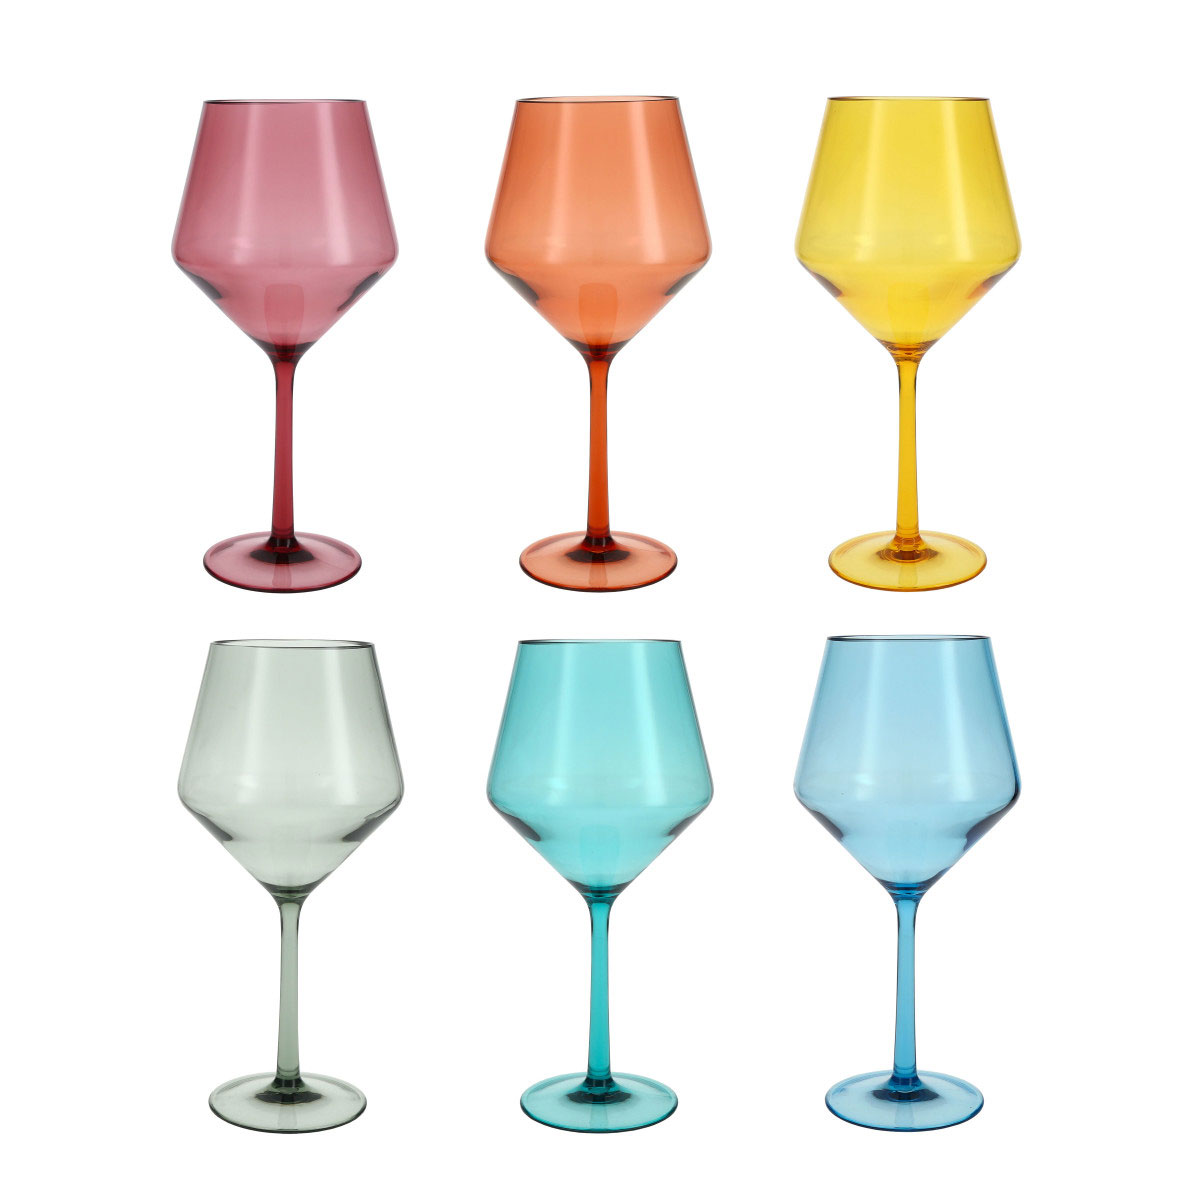 Fortessa Copolyester Sole Cabernet Glass, Assorted Colors, Set of 6